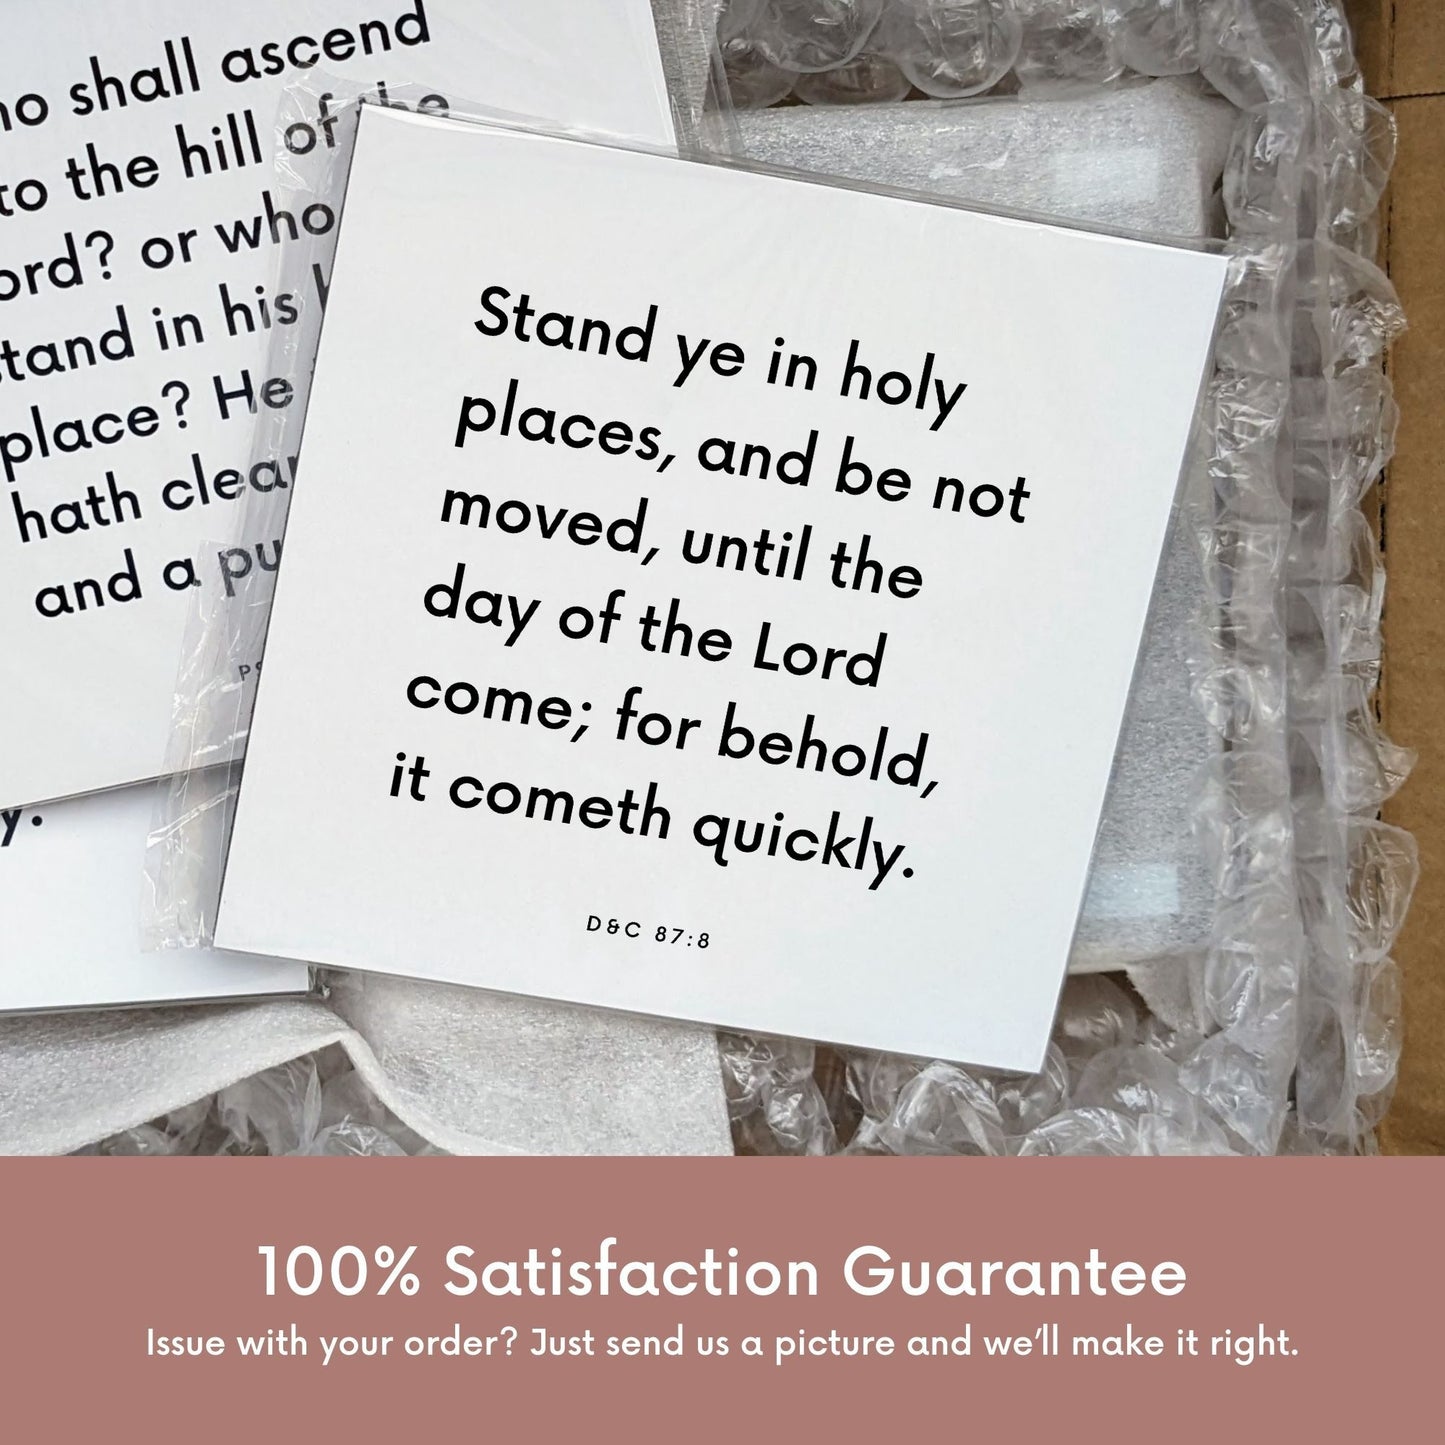 Shipping materials for scripture tile of D&C 87:8 - "Stand ye in holy places, and be not moved"